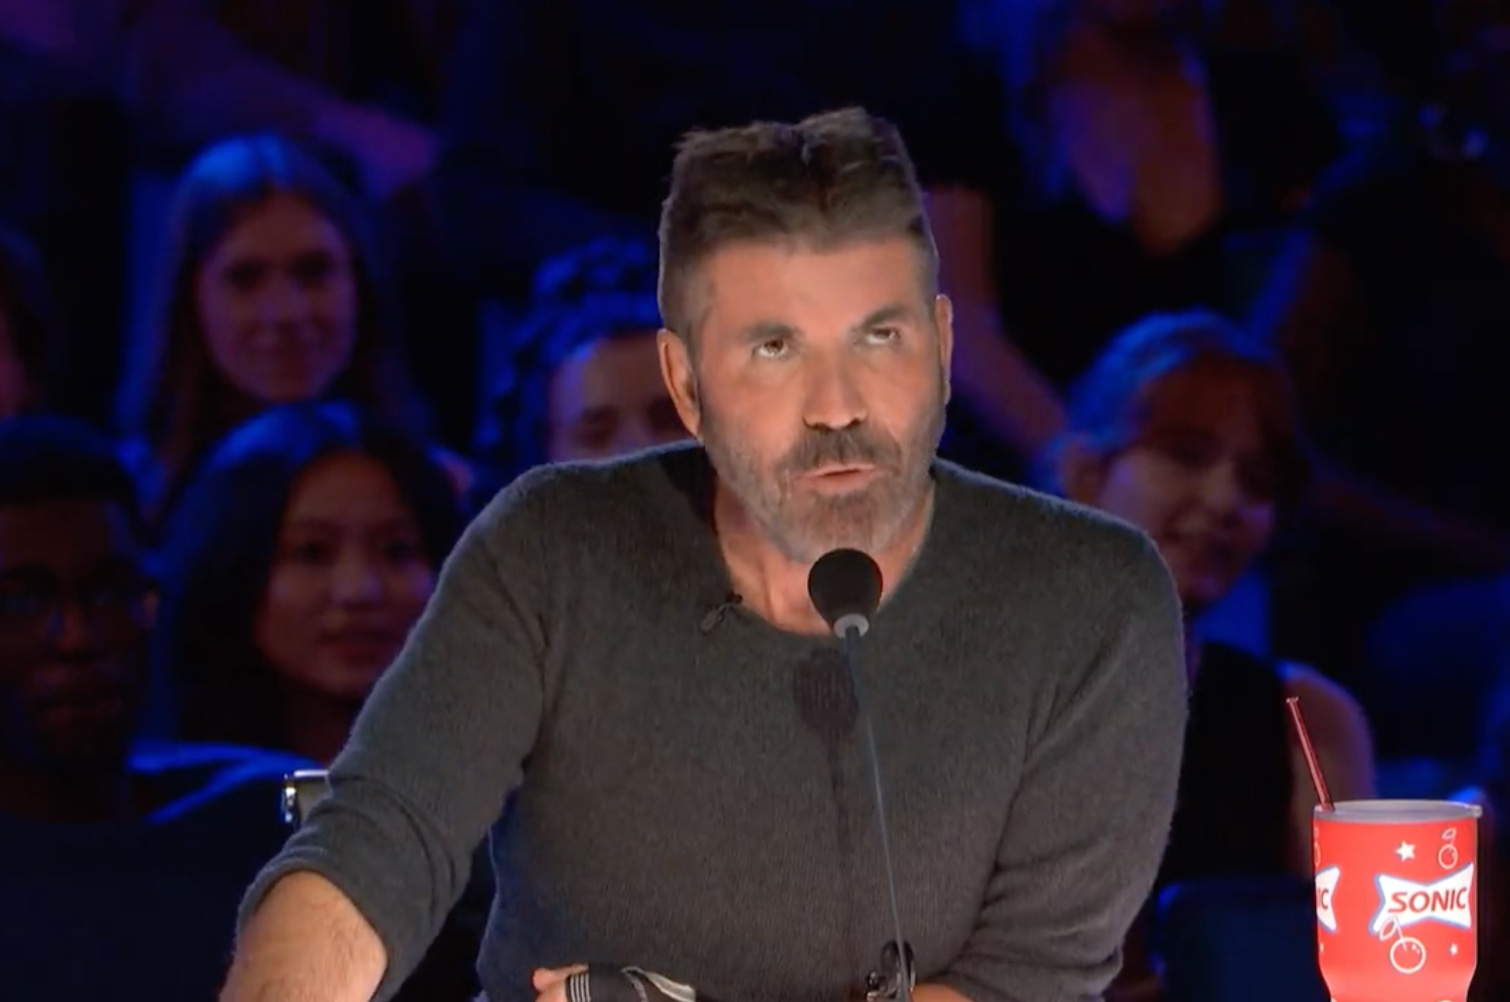 Simon said he's stopped using Botox or injectables due to son Eric's reaction to his face